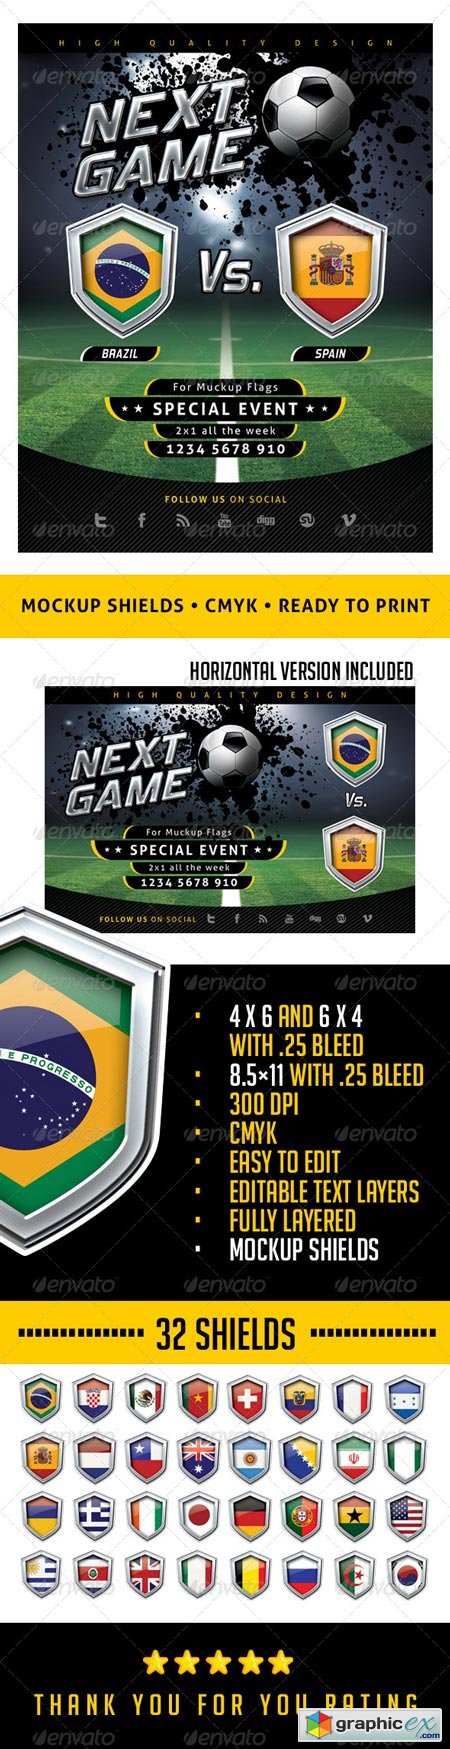 Flyer Soccer Template with Mockup Shields 6502798